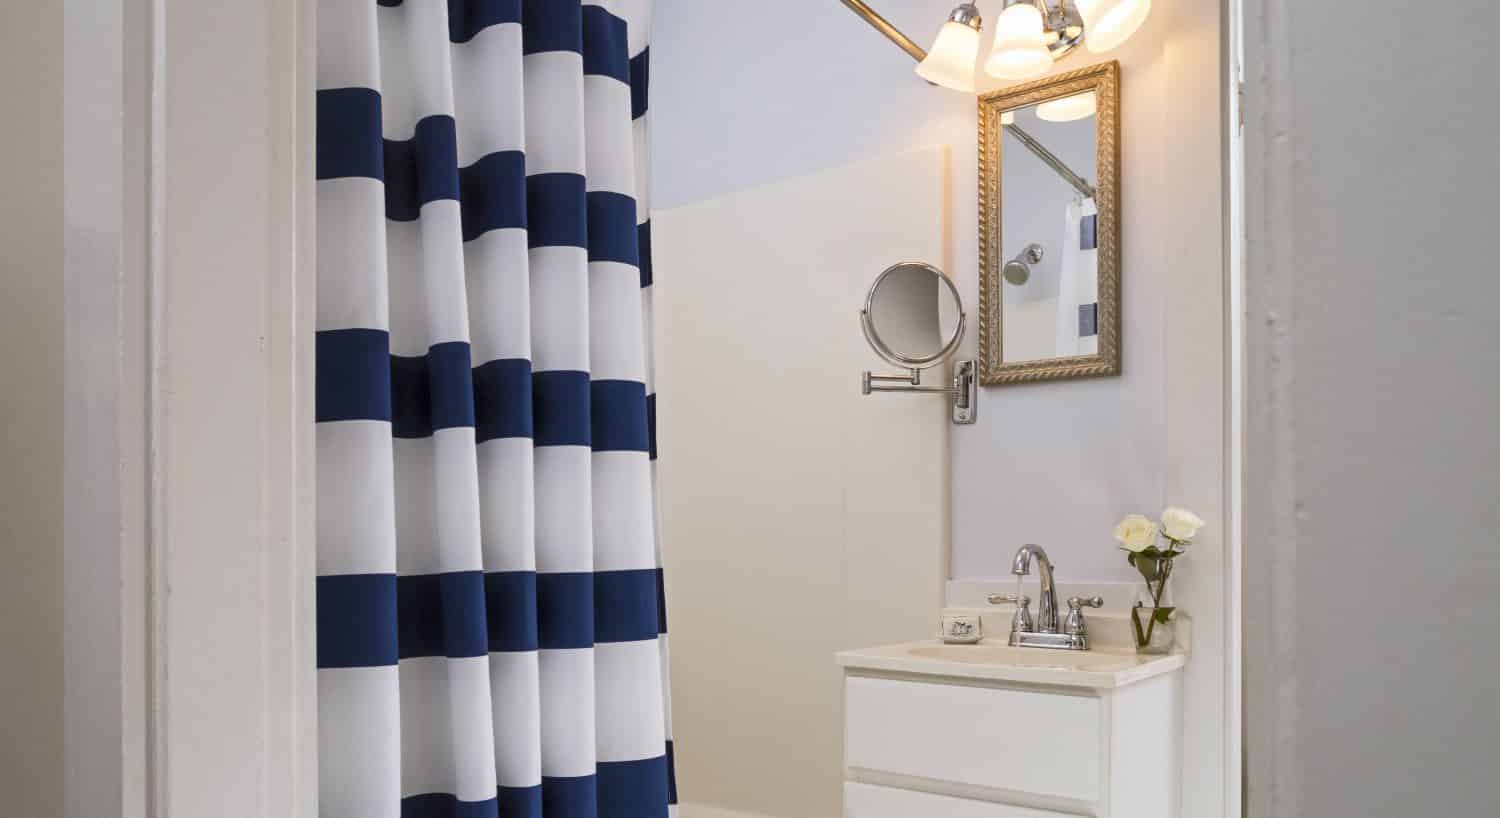 Bathroom with white vanity, cream sink, ornate mirror, and white and navy striped shower curtain